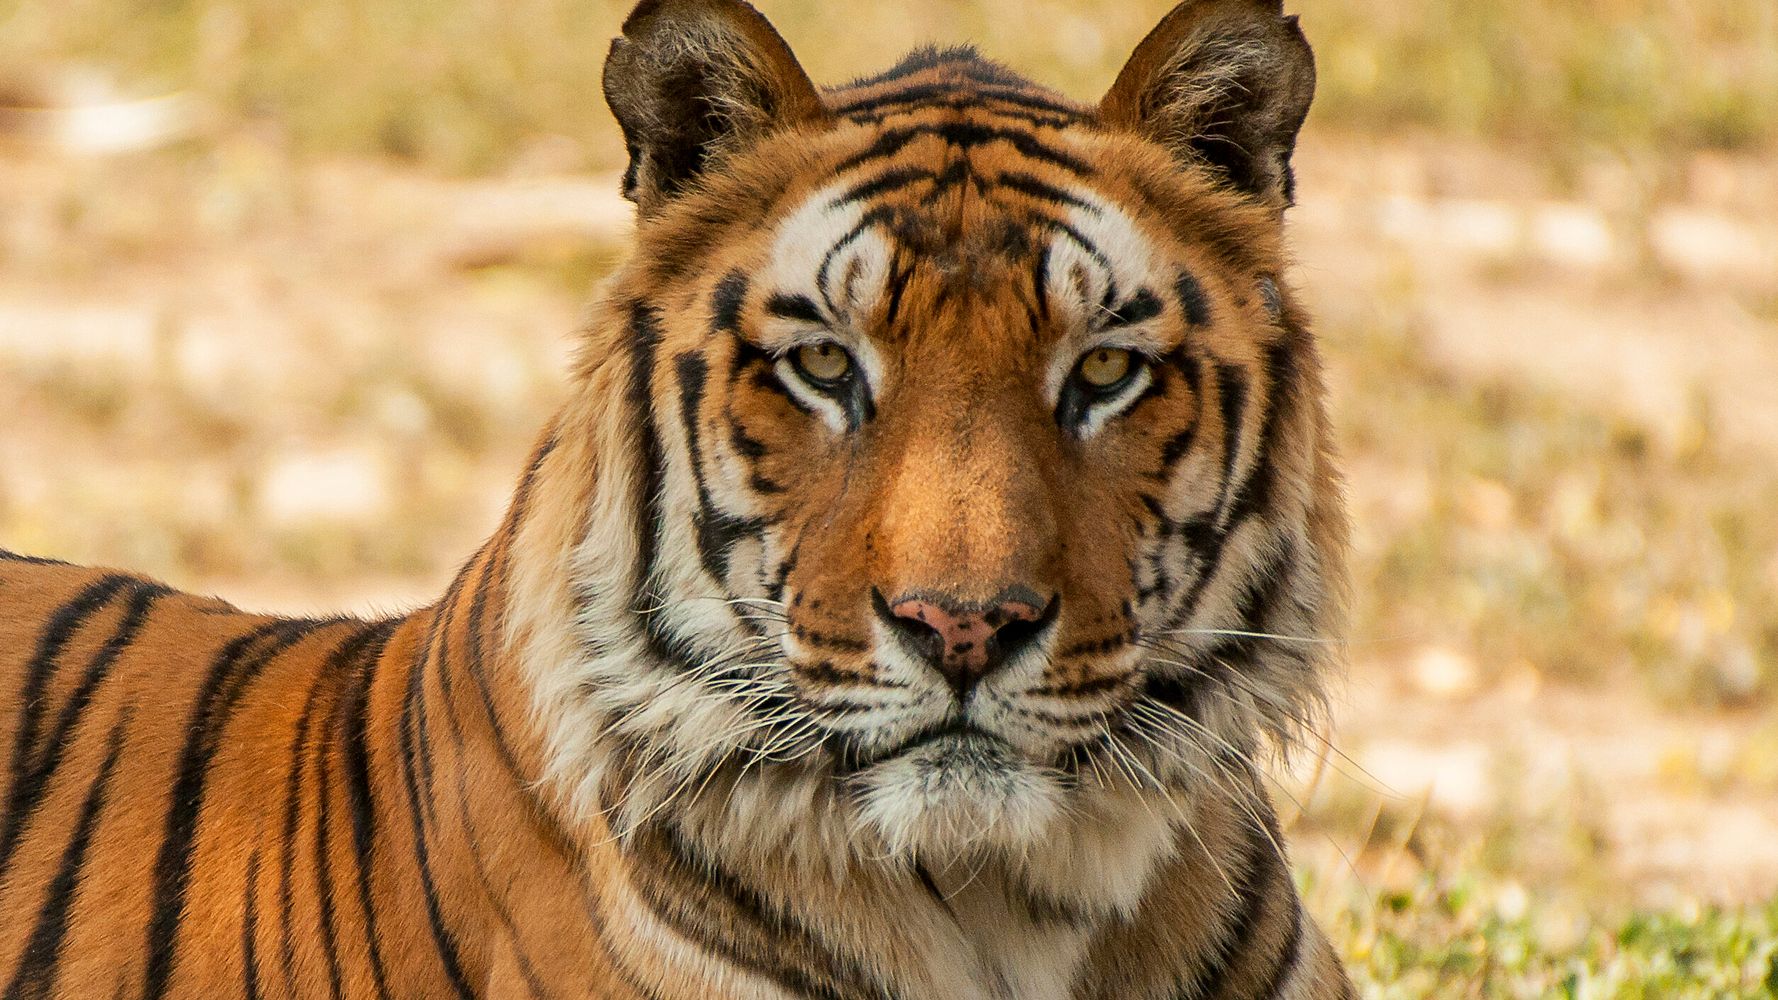 Police Detain Murder Suspect, Can't Find Tiger He Went On The Run With